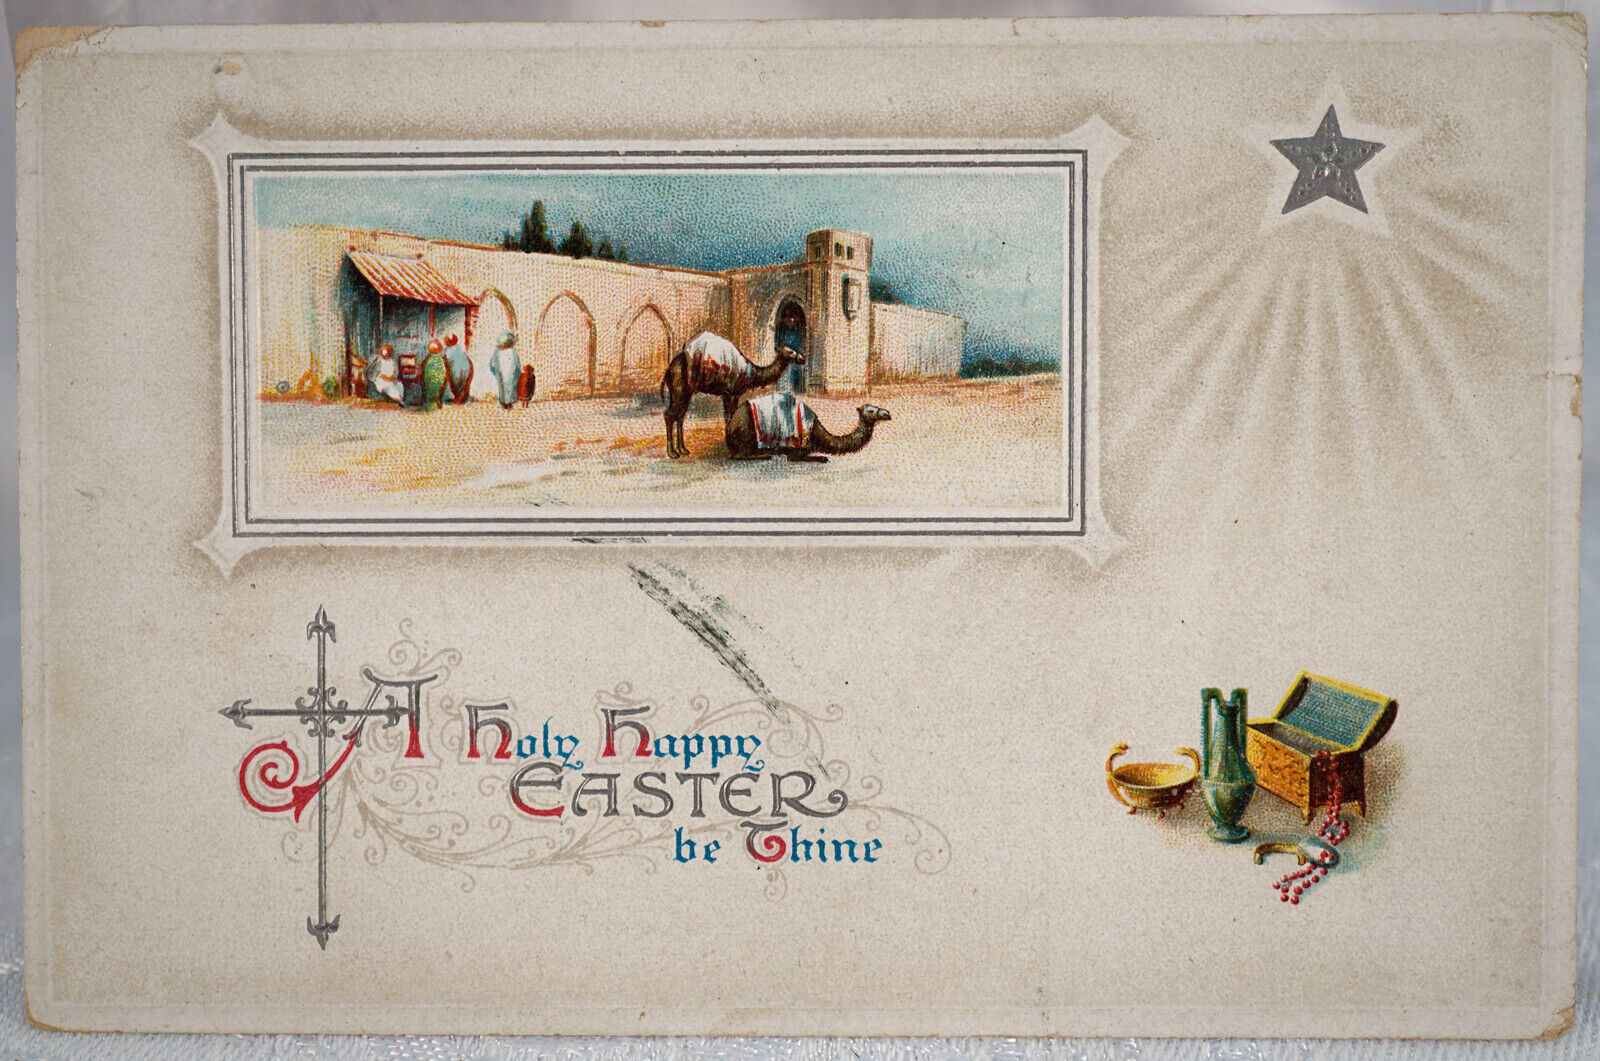 Antique Embossed Postcard A Happy Easter Be Thine - 1913 1 cent Stamp